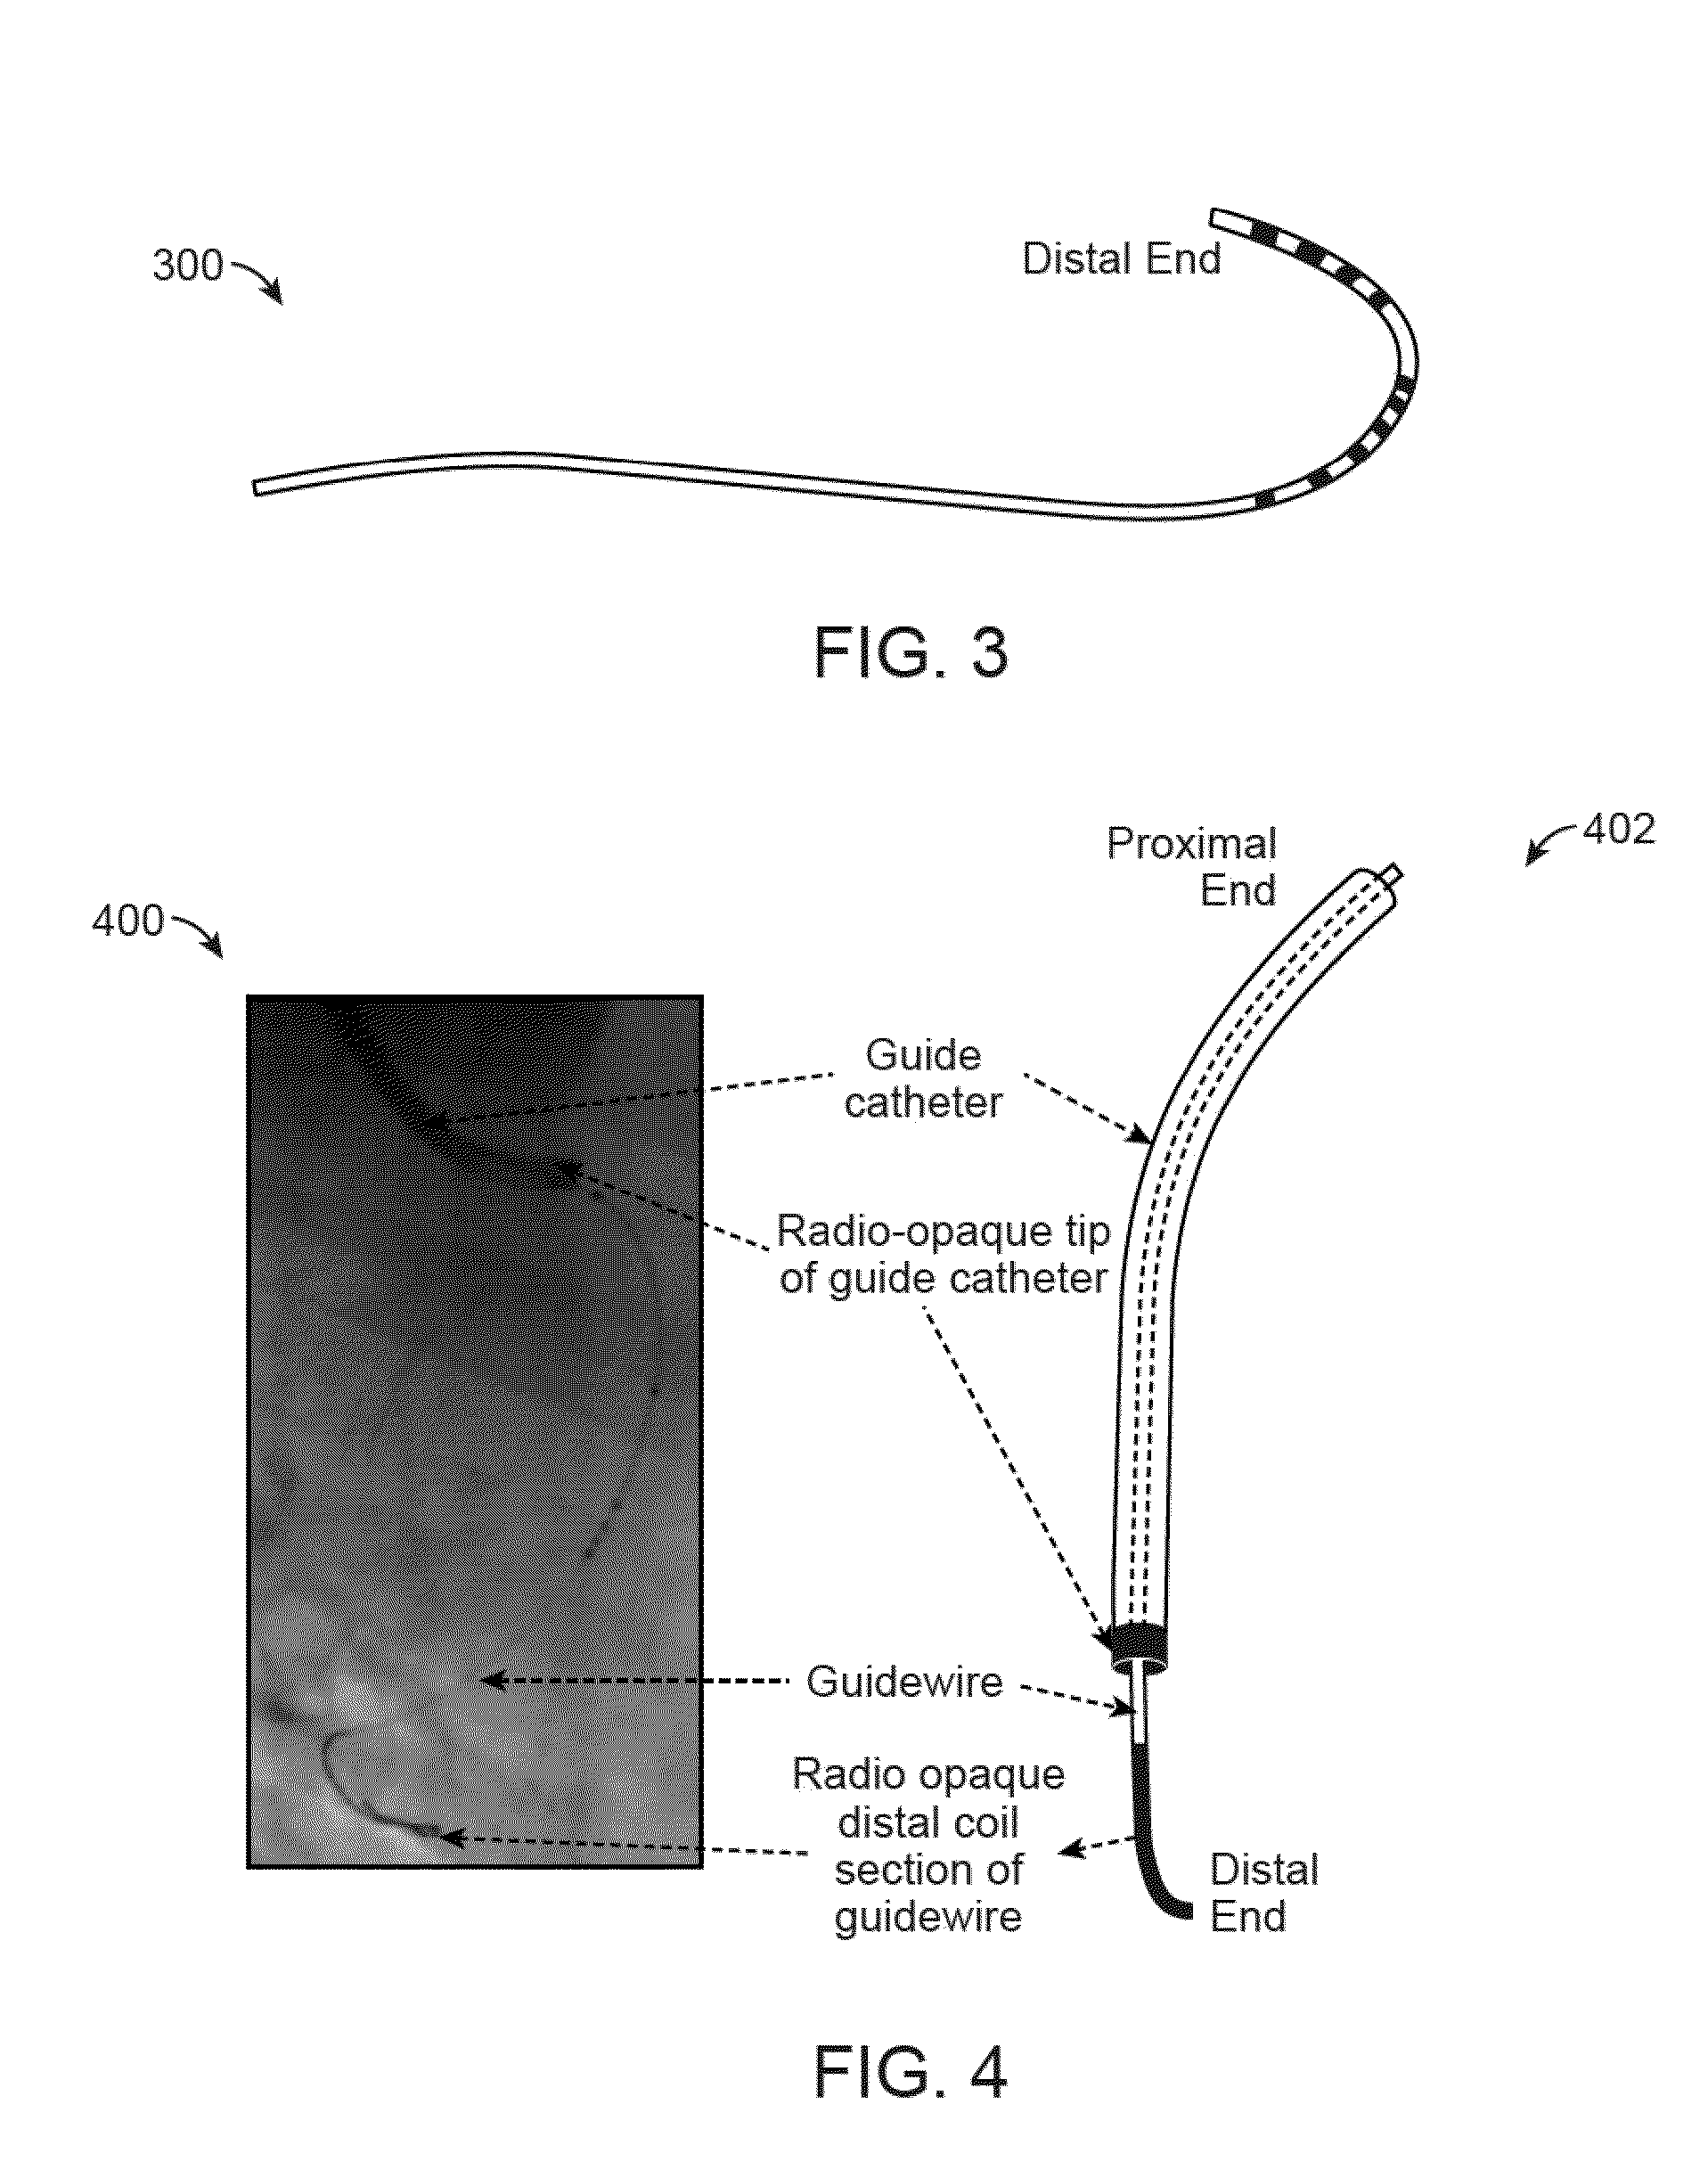 Systems for detecting and tracking of objects and co-registration